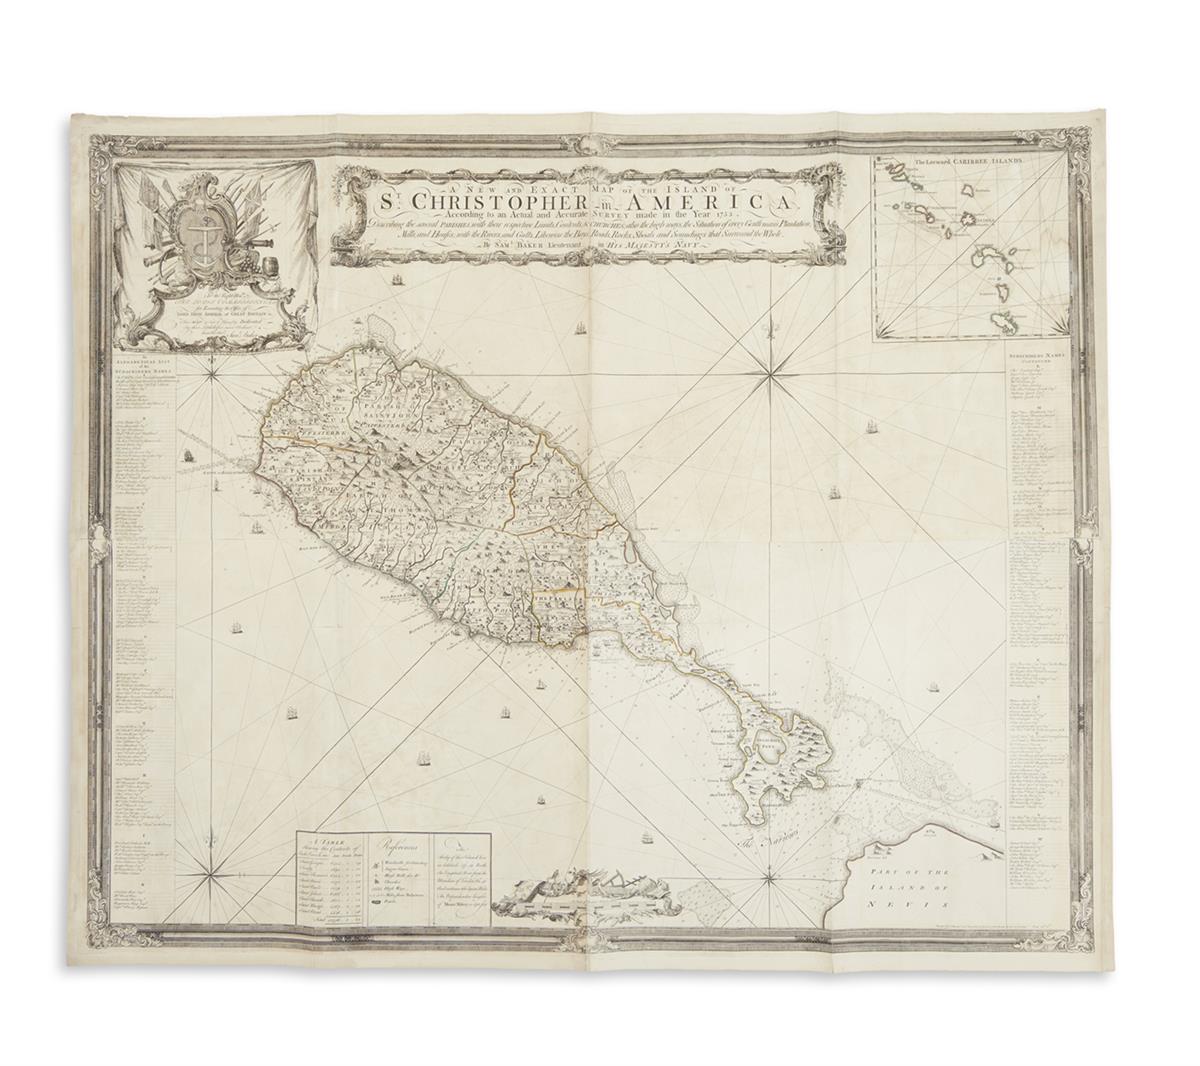 BAKER, SAMUEL. A New and Exact Map of the Island of St. Christopher in America,